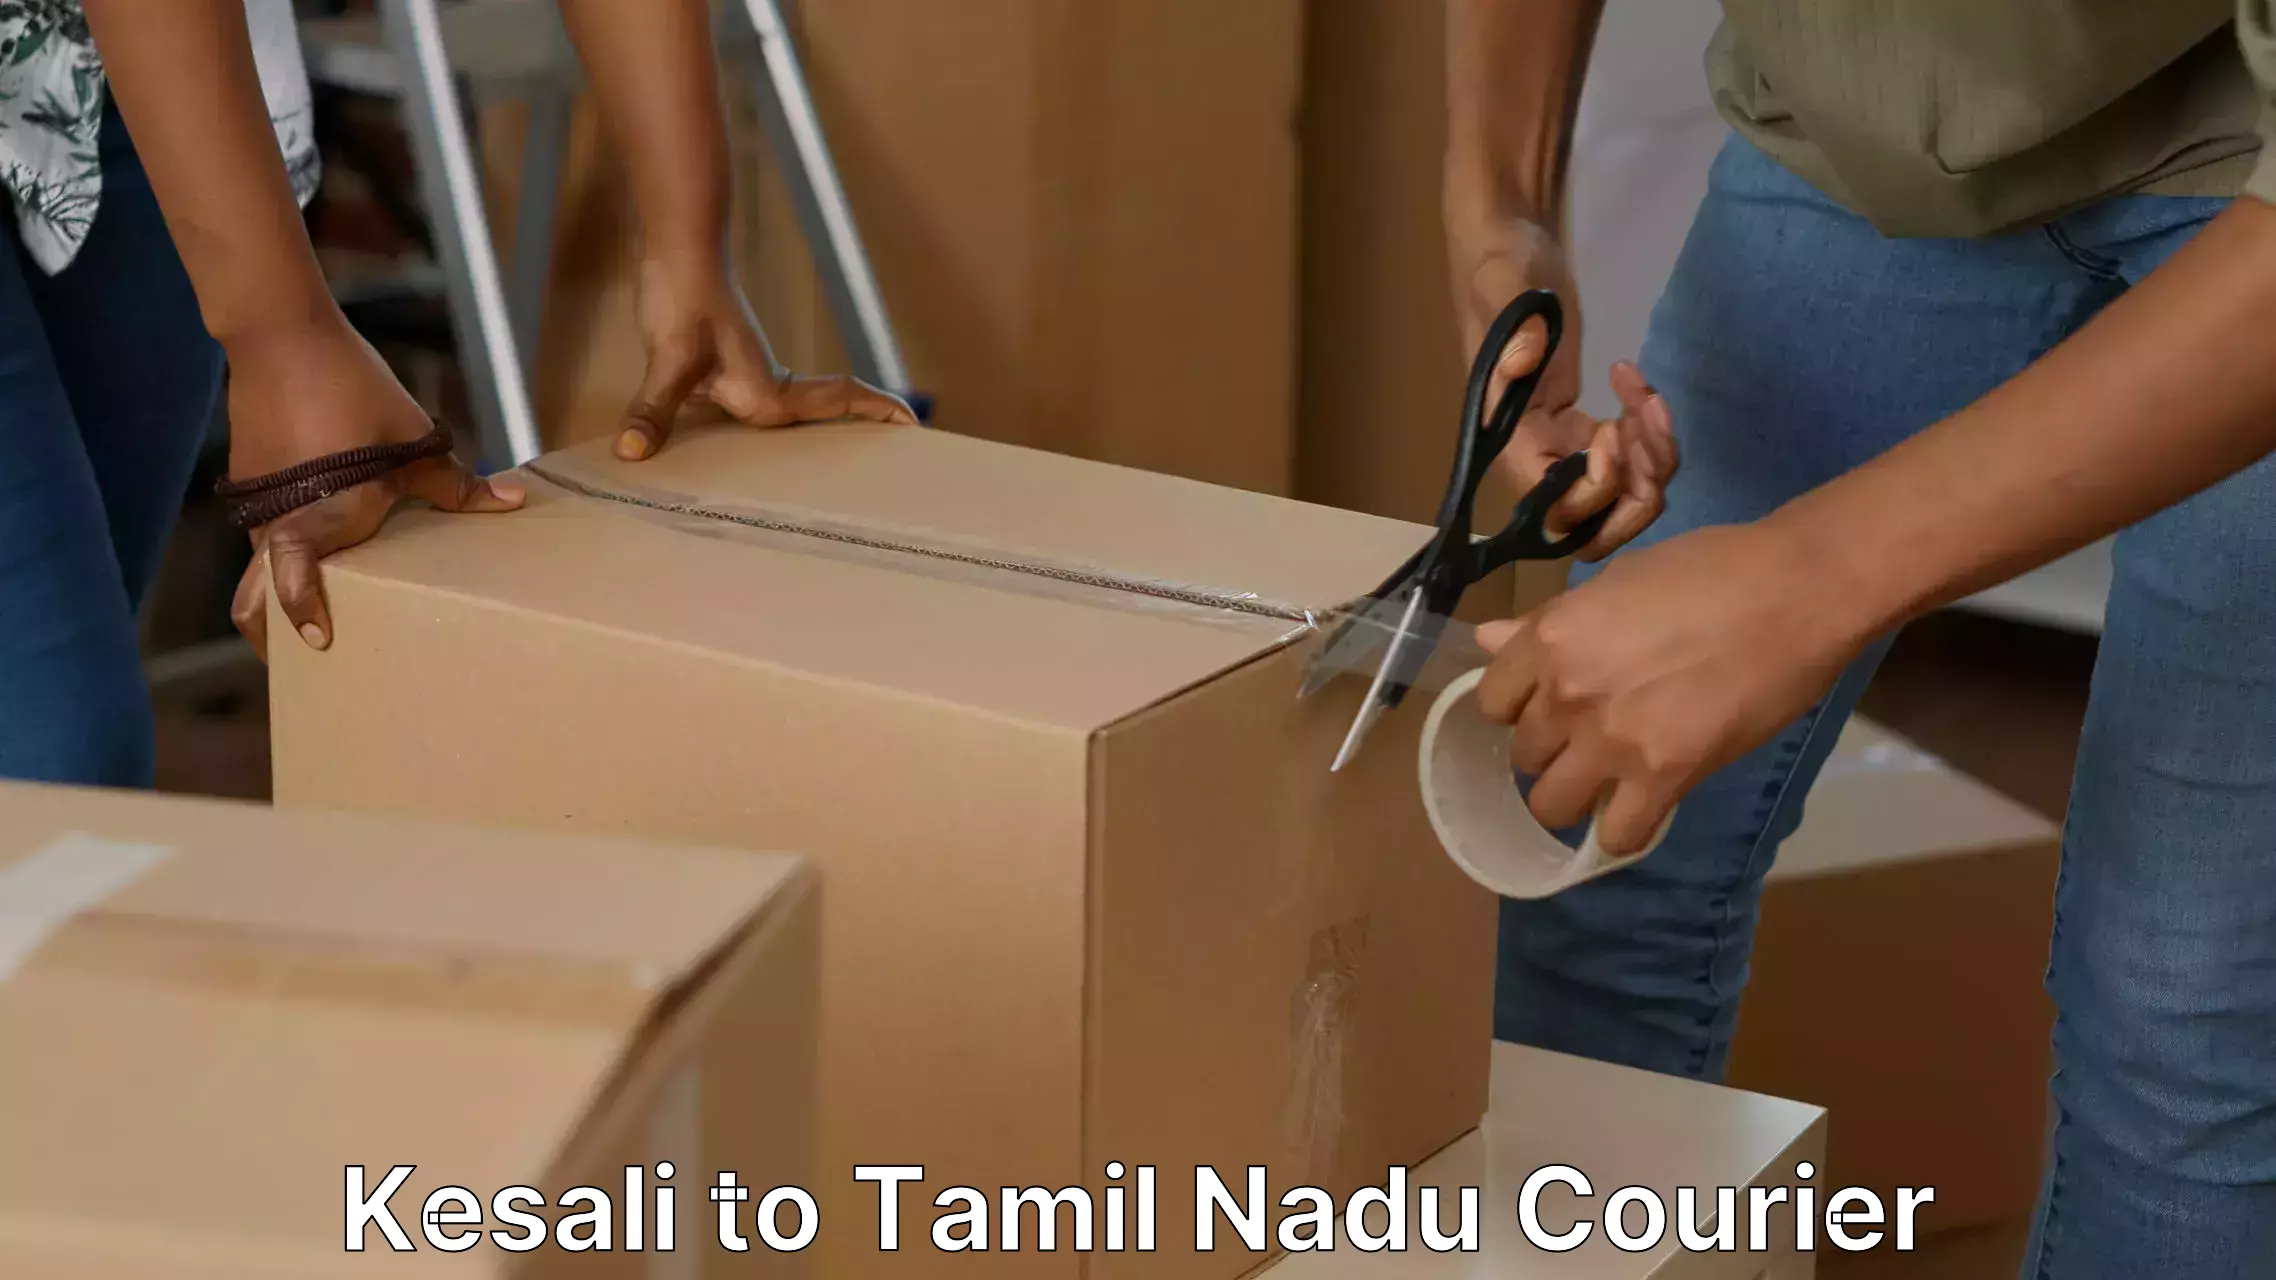 Reliable relocation services Kesali to Chennai Port